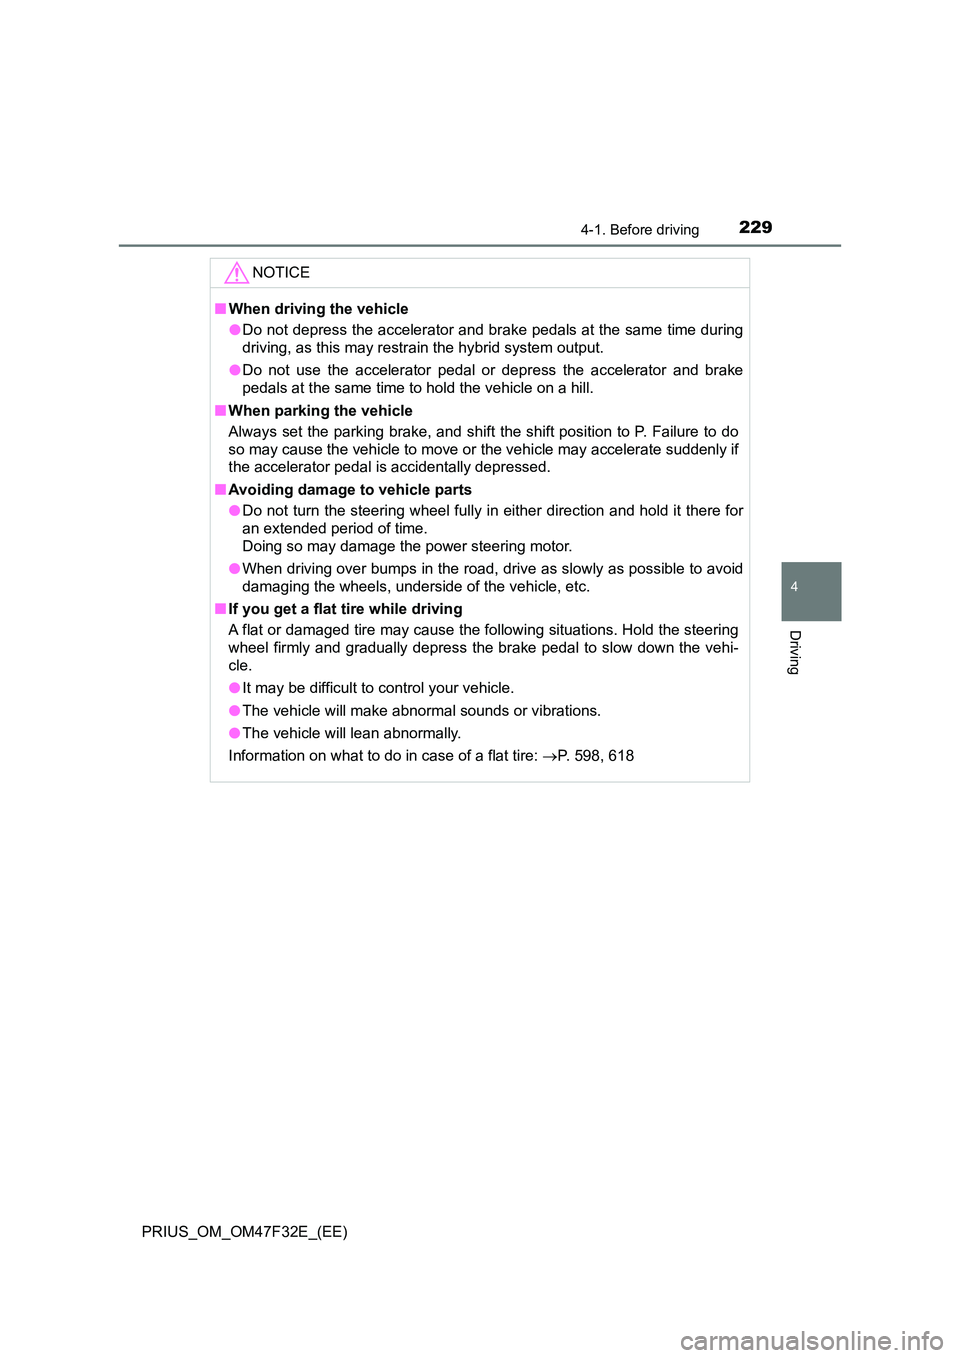 TOYOTA PRIUS 2023  Owners Manual 2294-1. Before driving
4
Driving
PRIUS_OM_OM47F32E_(EE)
NOTICE
■When driving the vehicle 
● Do not depress the accelerator and brake pedals at the same time during 
driving, as this may restrain t